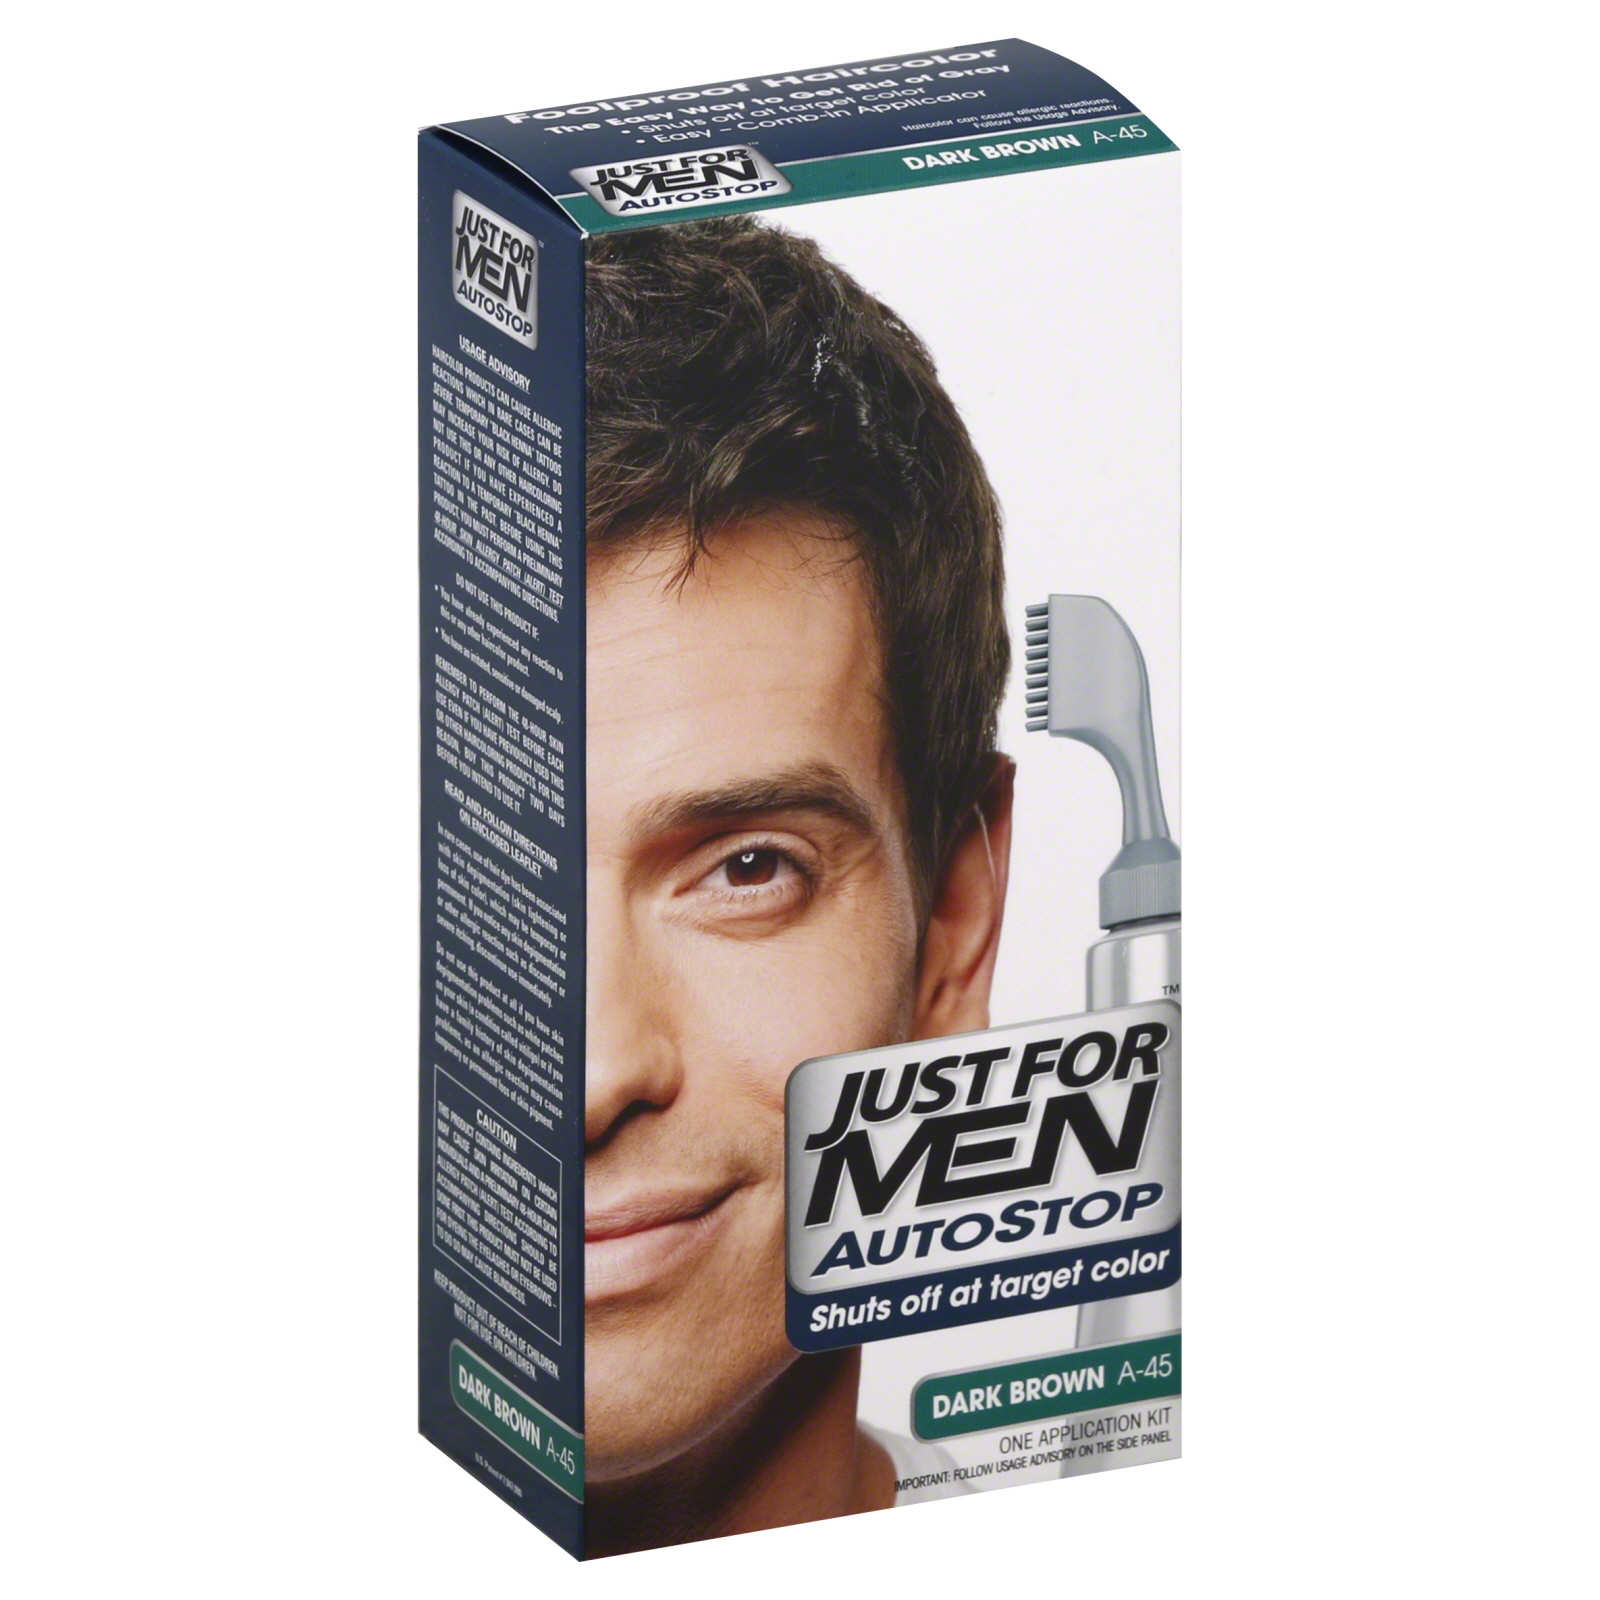 Just For Men Auto Stop Foolproof Hair Color Dark Brown A-45